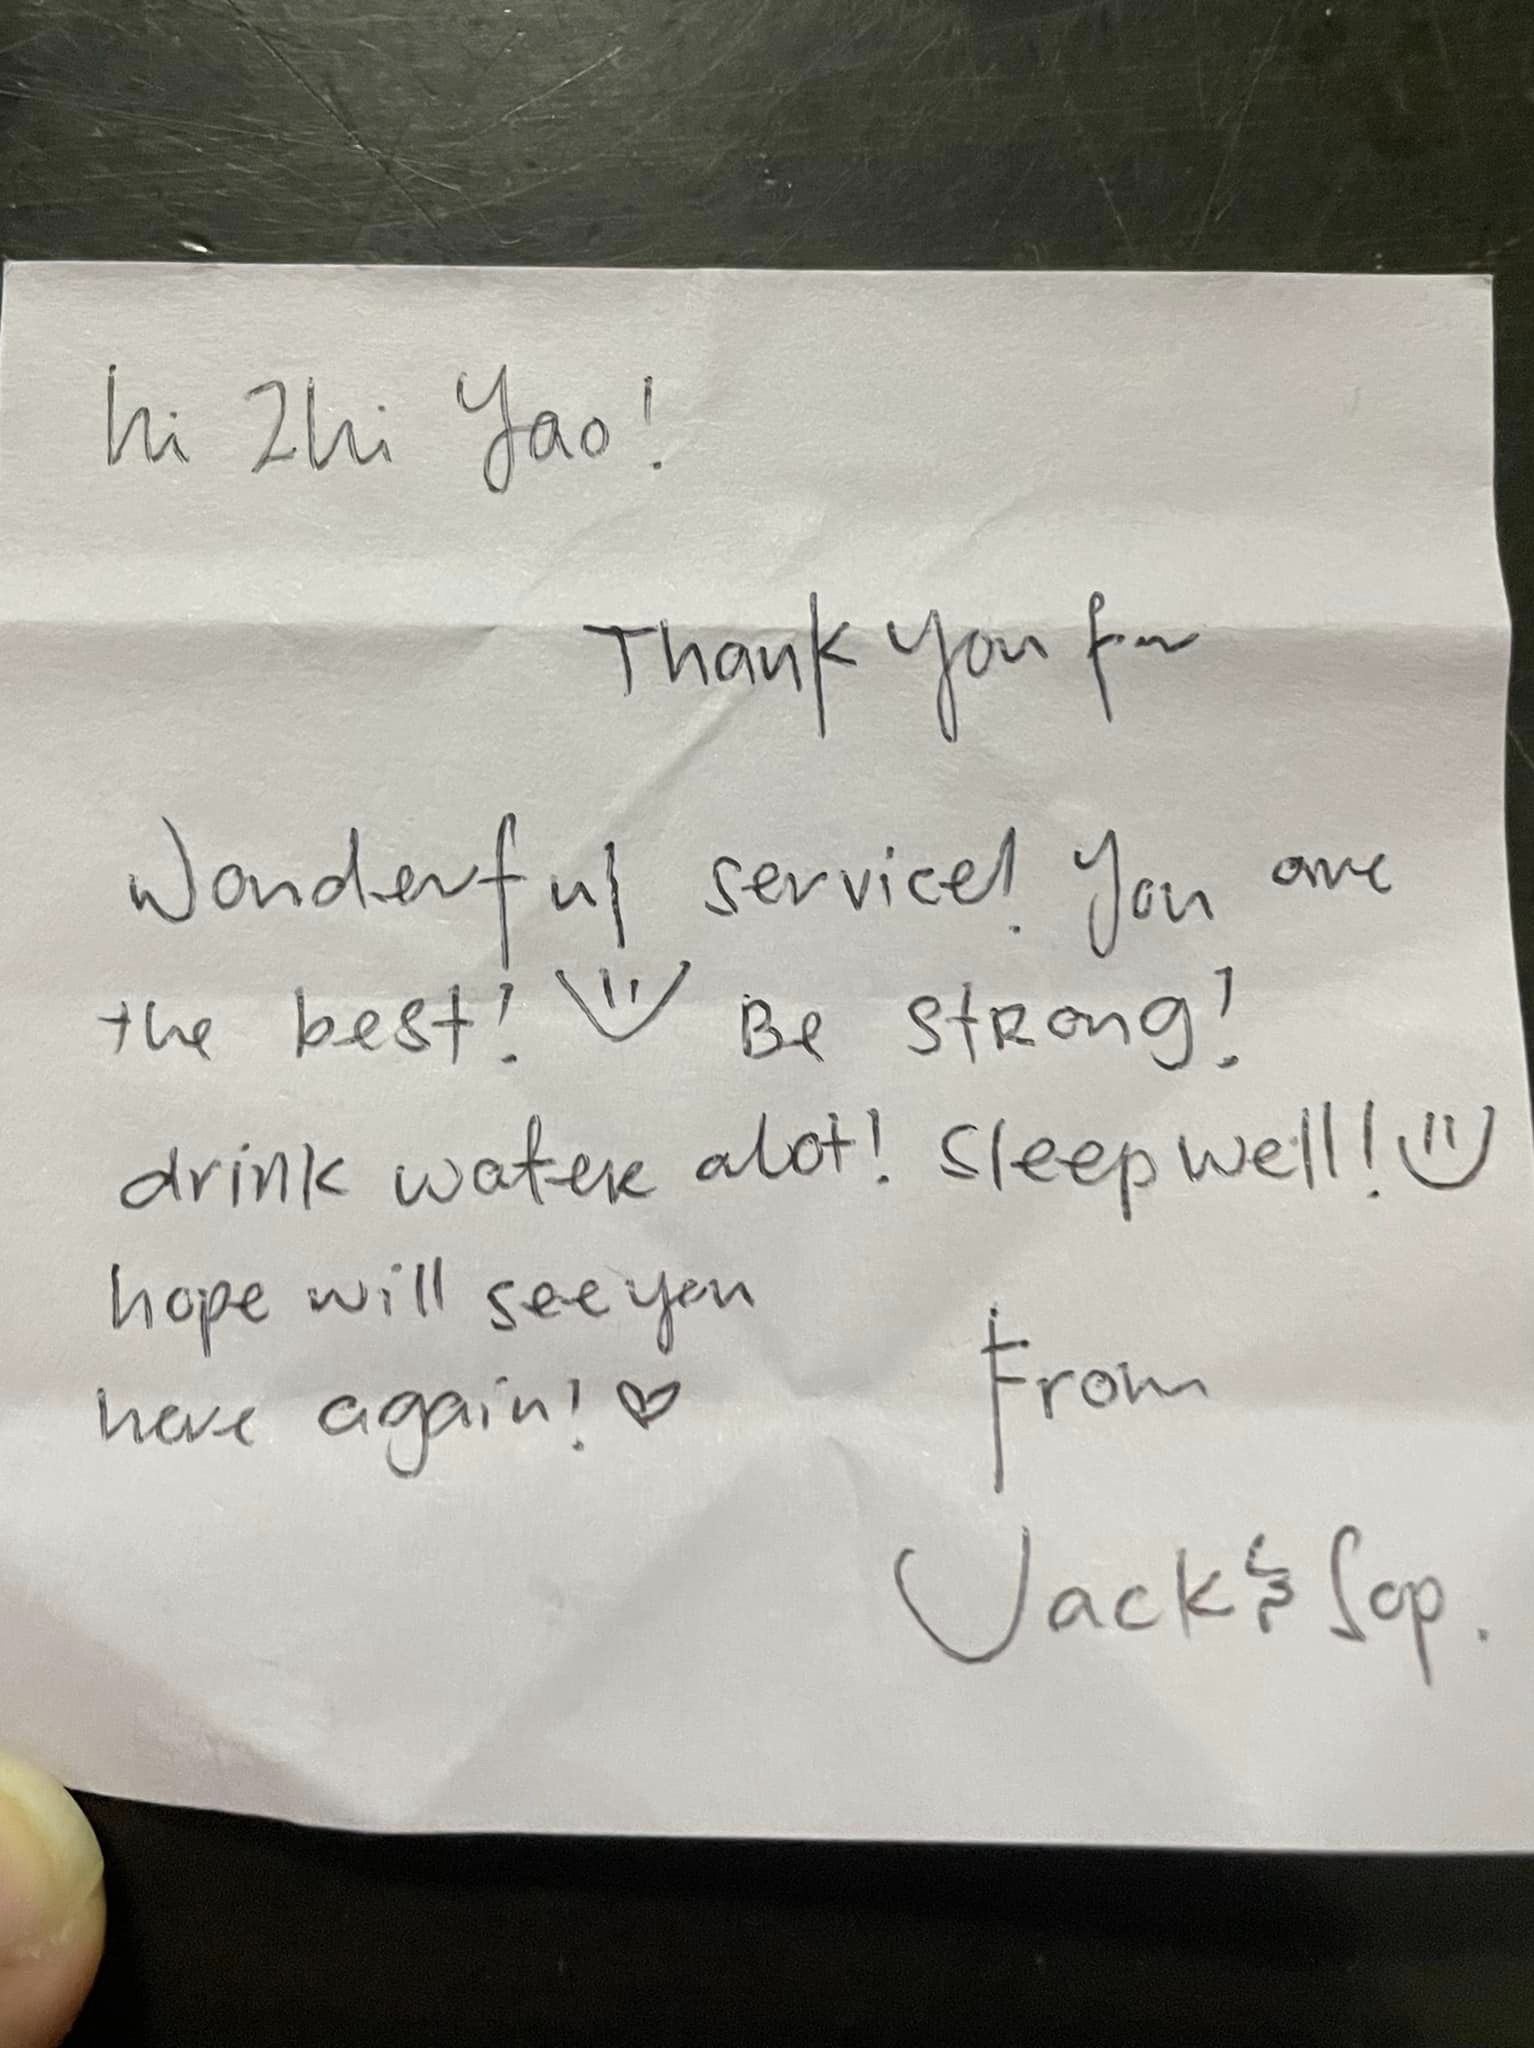 The customer left Zhi Yao with a heartfelt message of appreciation for her service. Image credit: 曾芷瑶